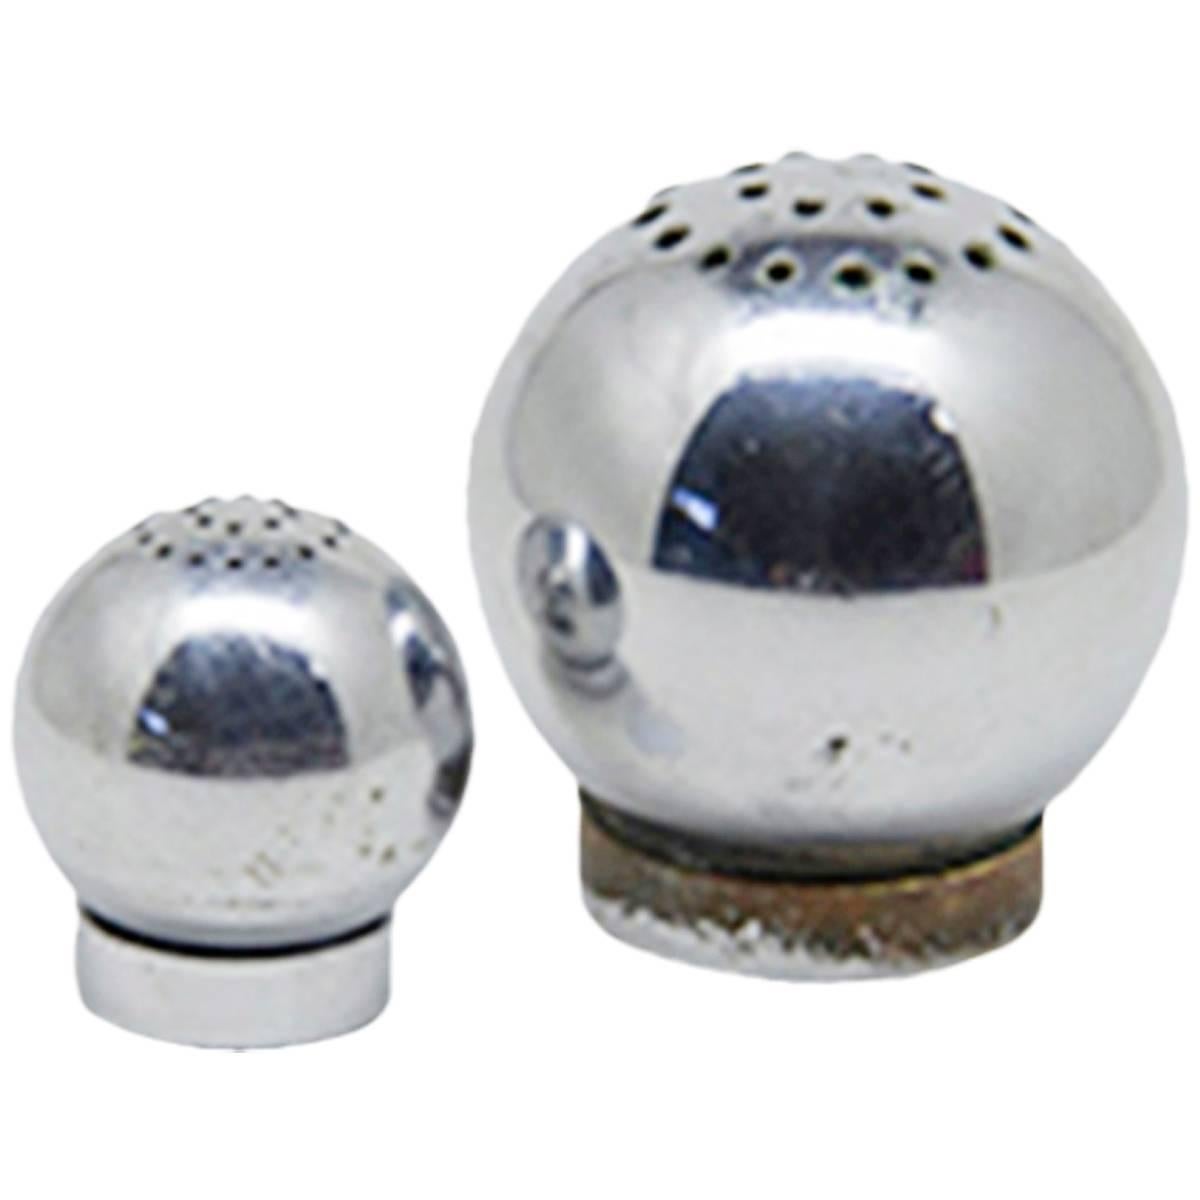 Russel Wright for Chase Brass and Copper Co. Salt and Pepper Shakers, circa 1935